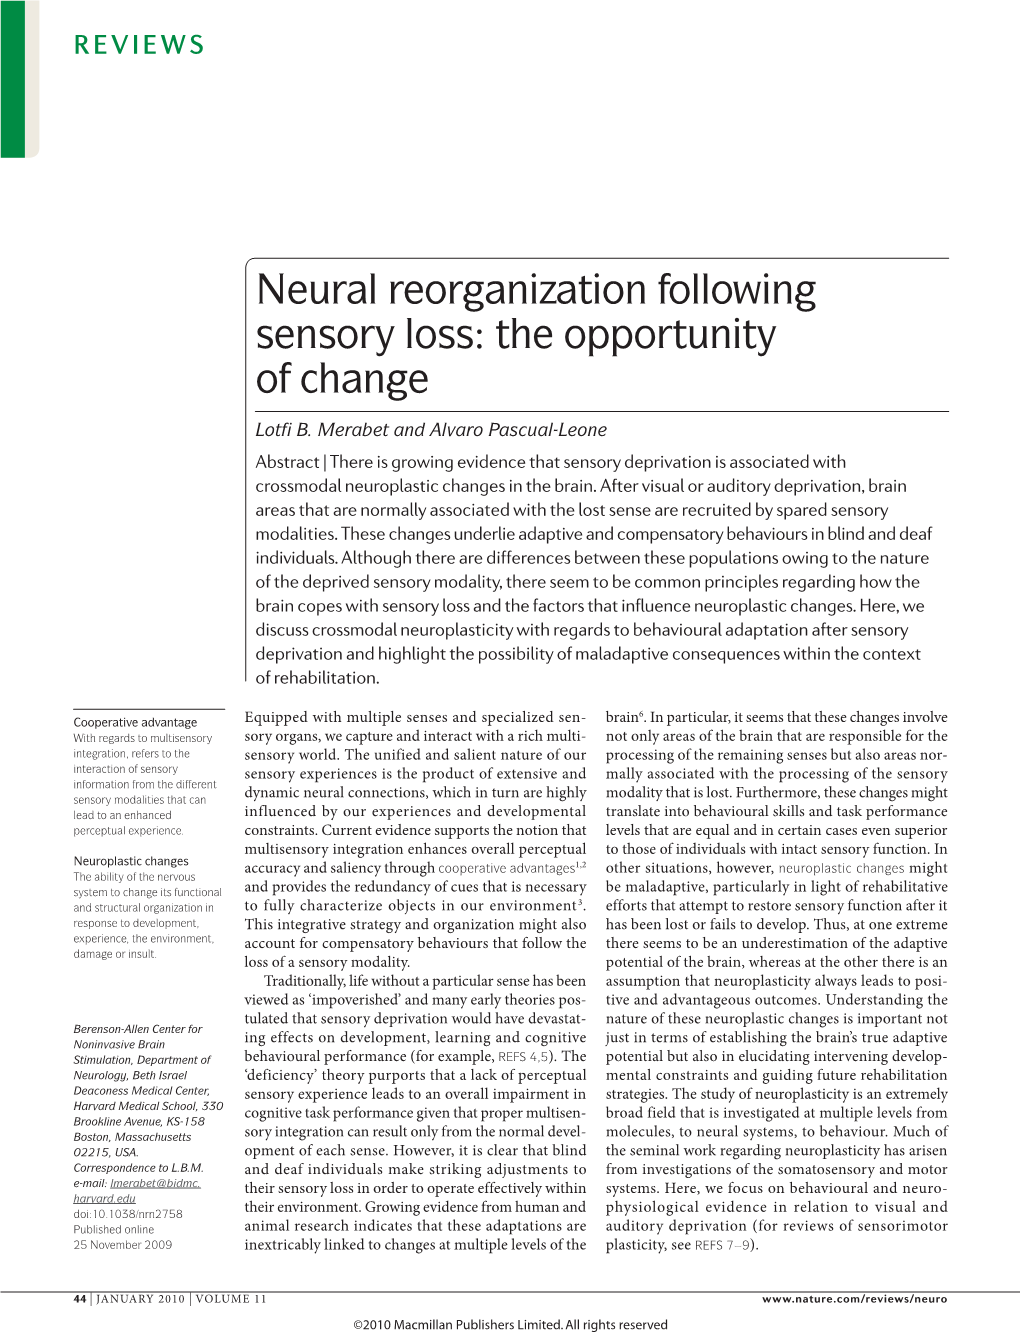 Neural Reorganization Following Sensory Loss: the Opportunity of Change